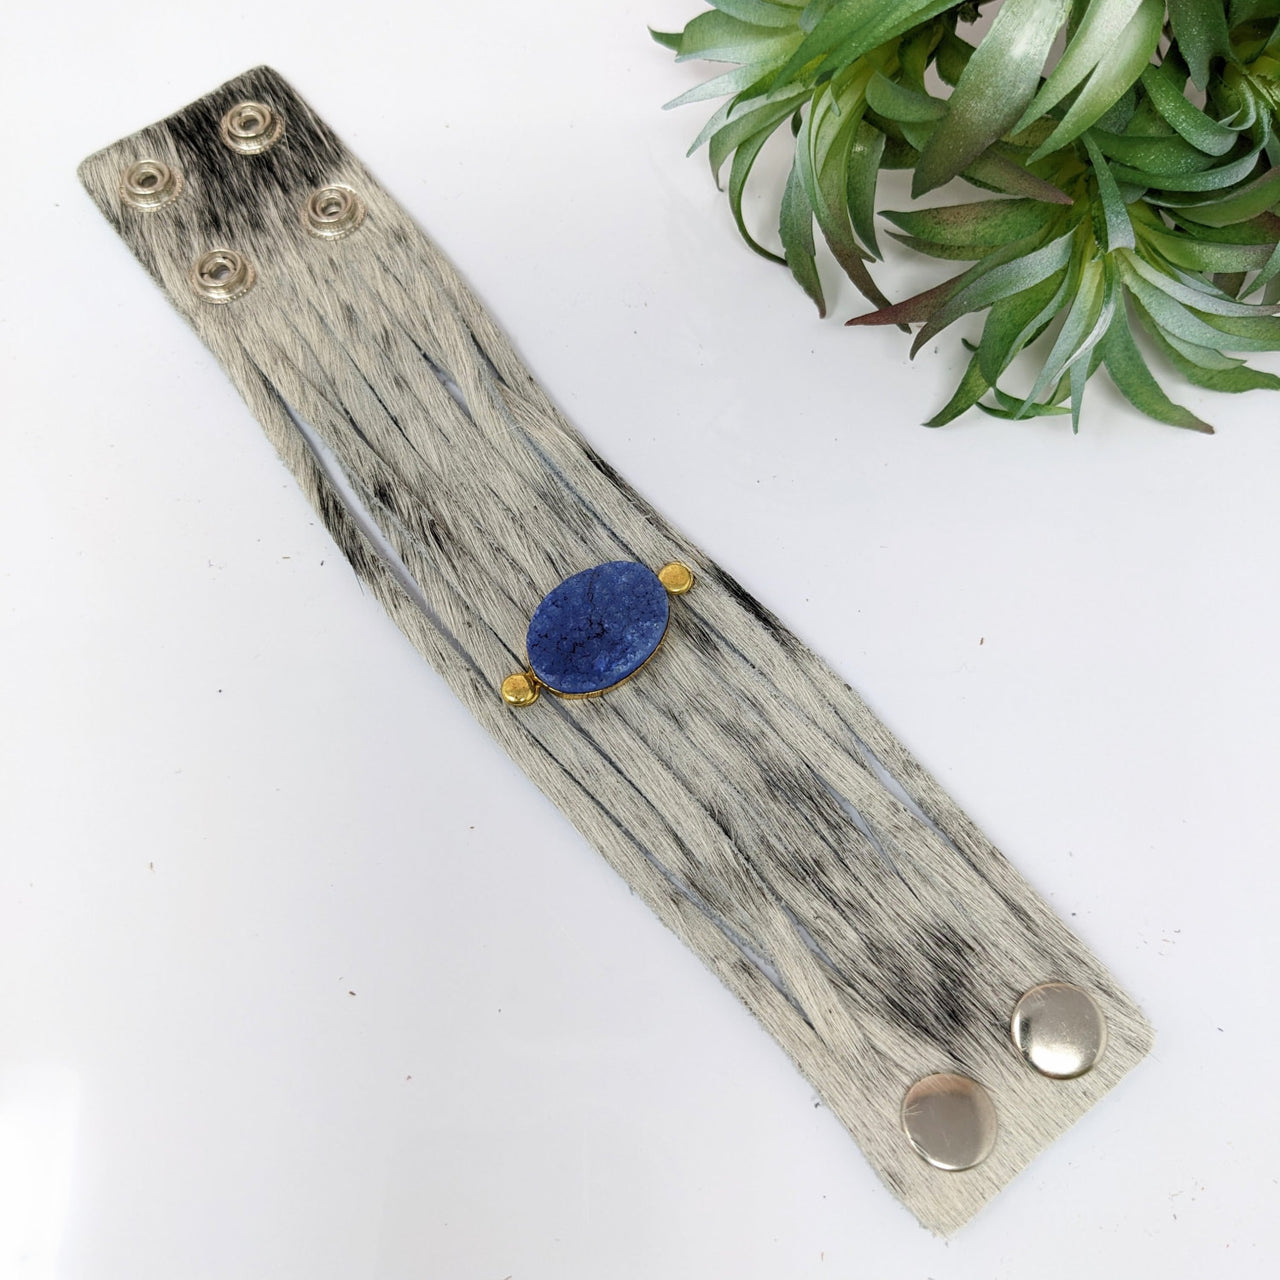 Wooden and metal door handle with blue stone, product: Leather Bracelet 7-8’ 9 Strand #LV2758